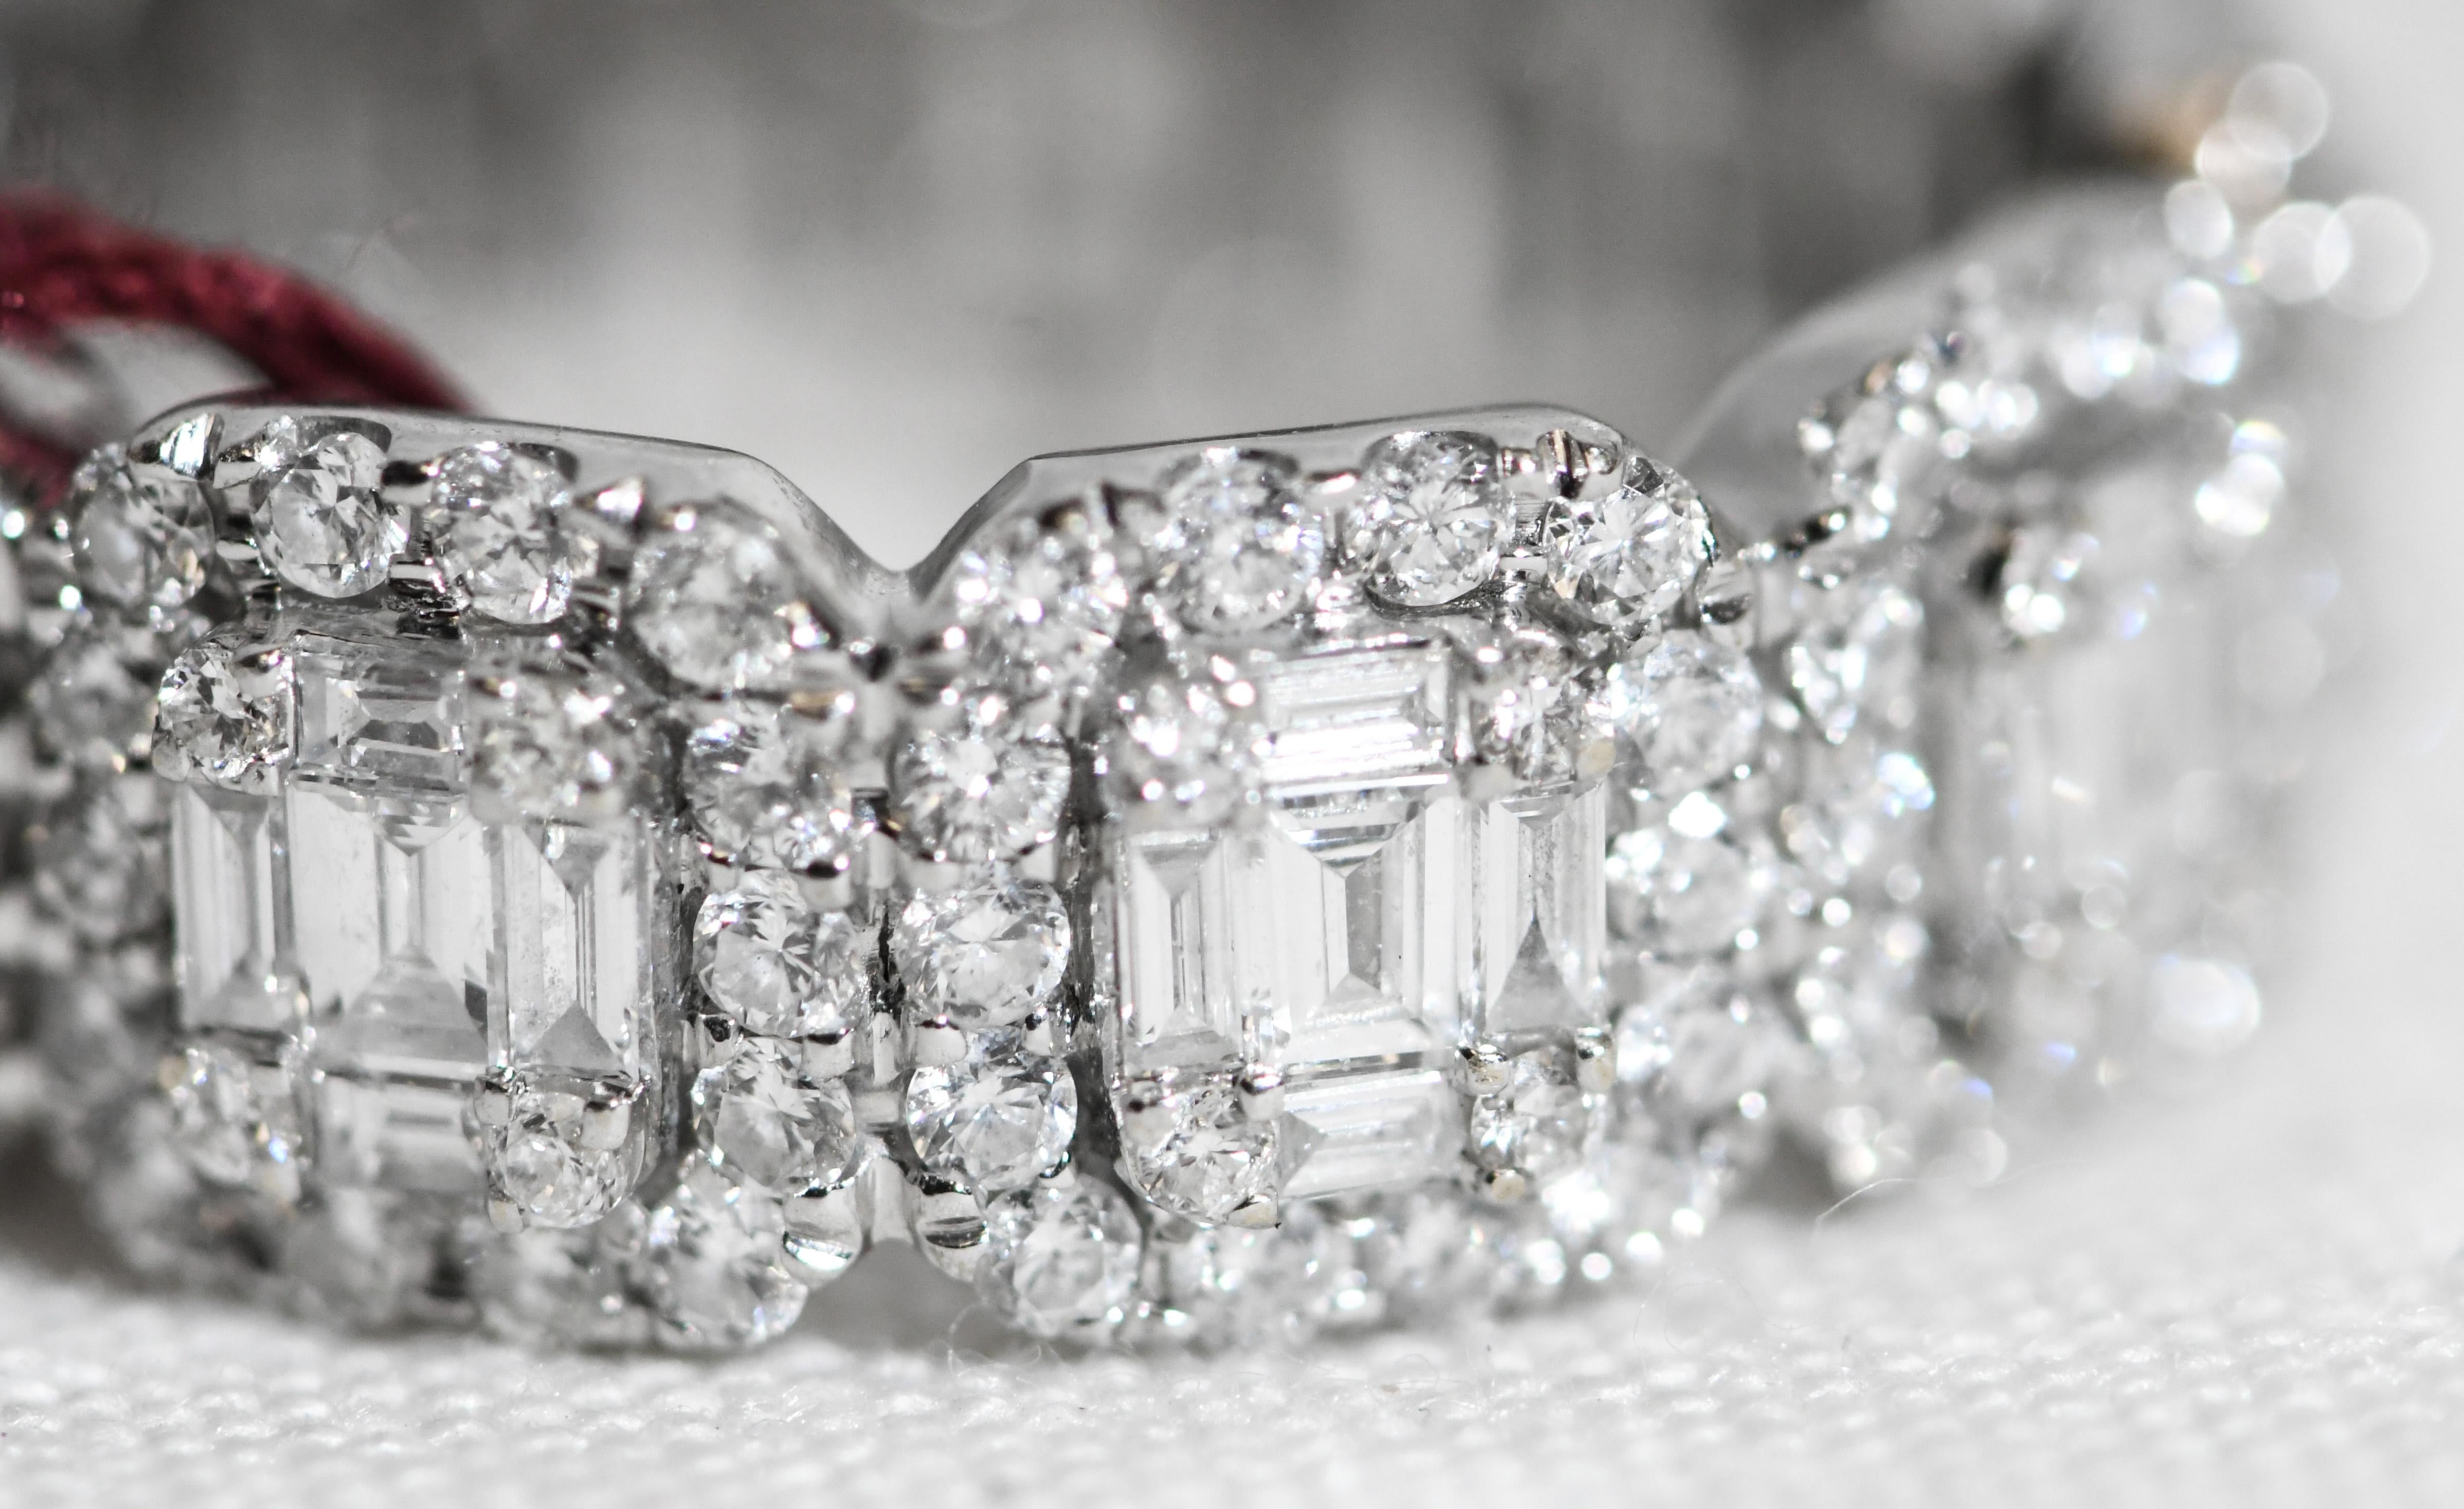 Meticulously crafted in 18 karat white gold, this stunning Eternity Band is genius of design.  Each section appears to contain an emerald cut diamond in the center.  Closer inspection reveals each station containing at the center, baguette diamonds